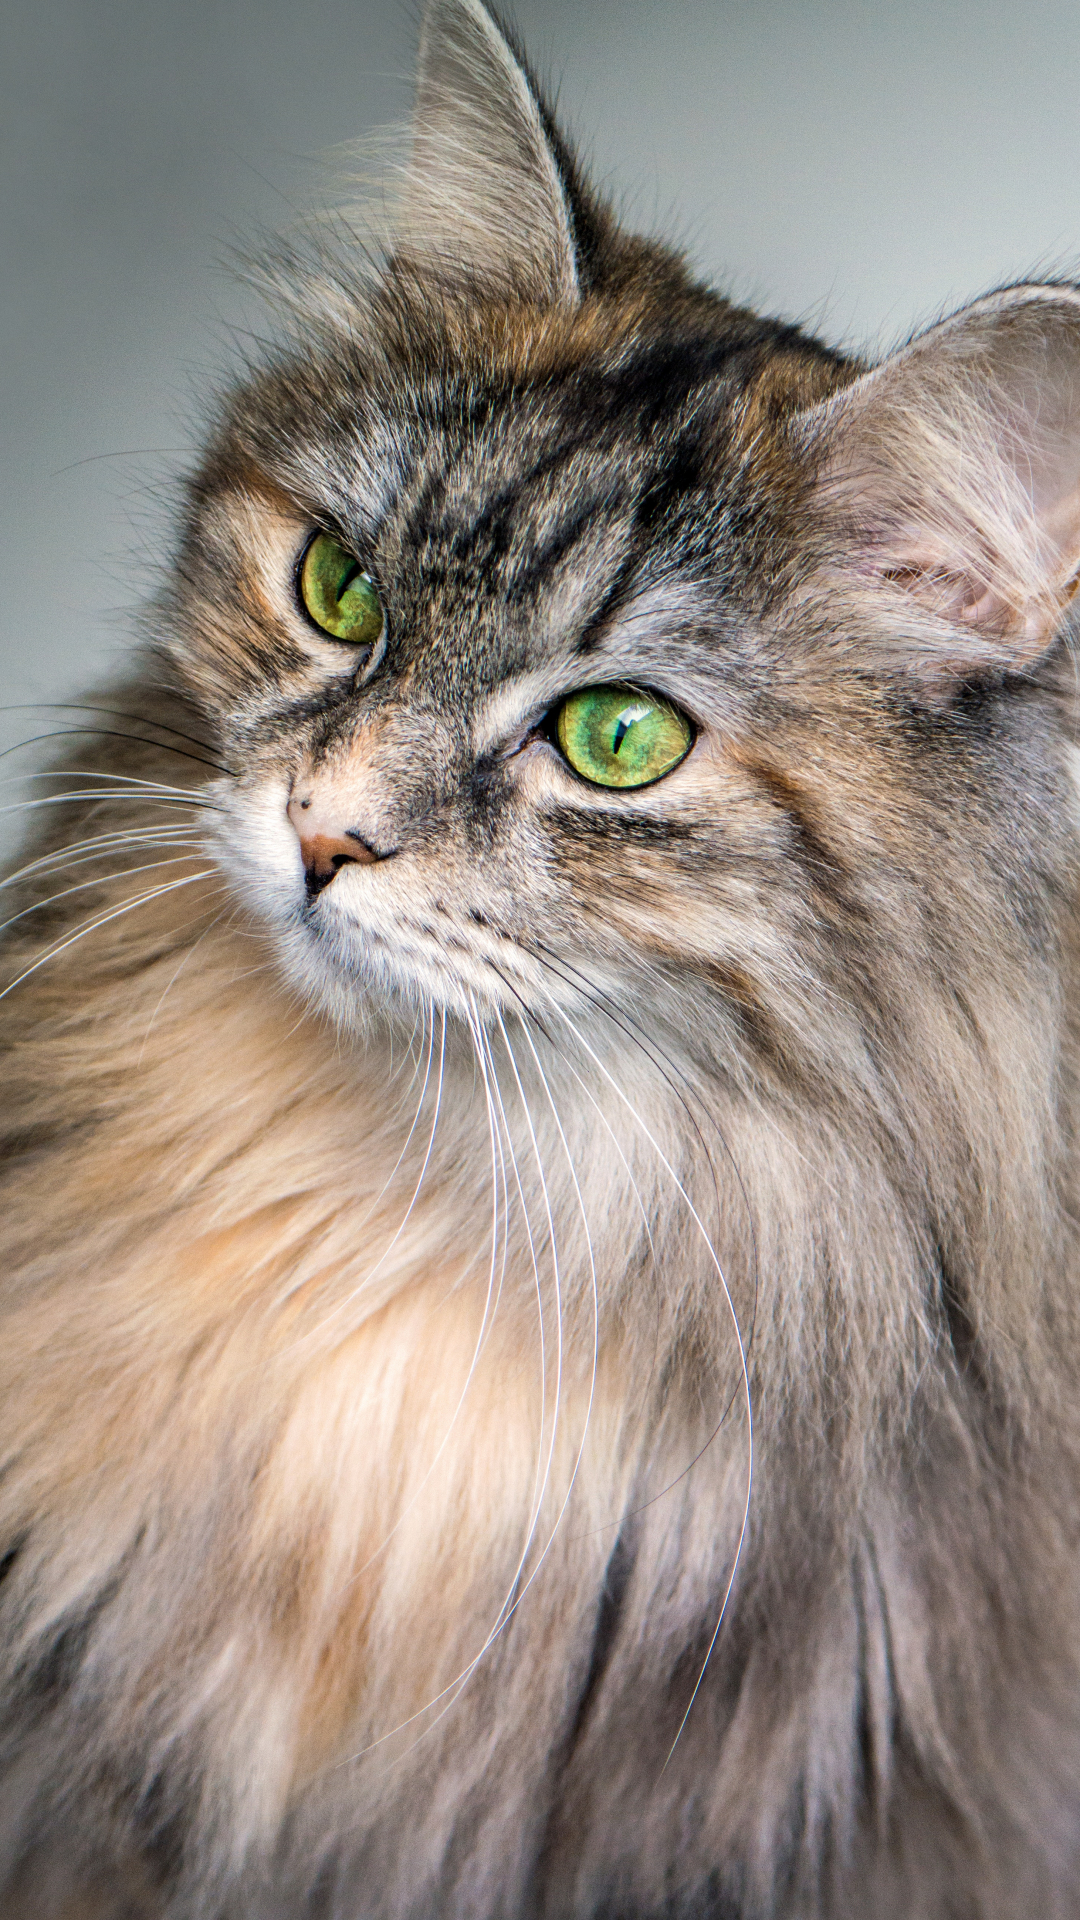 Maine Coon Portrait Iphone Wallpaper - Long Haired Cat Green Eyes - HD Wallpaper 